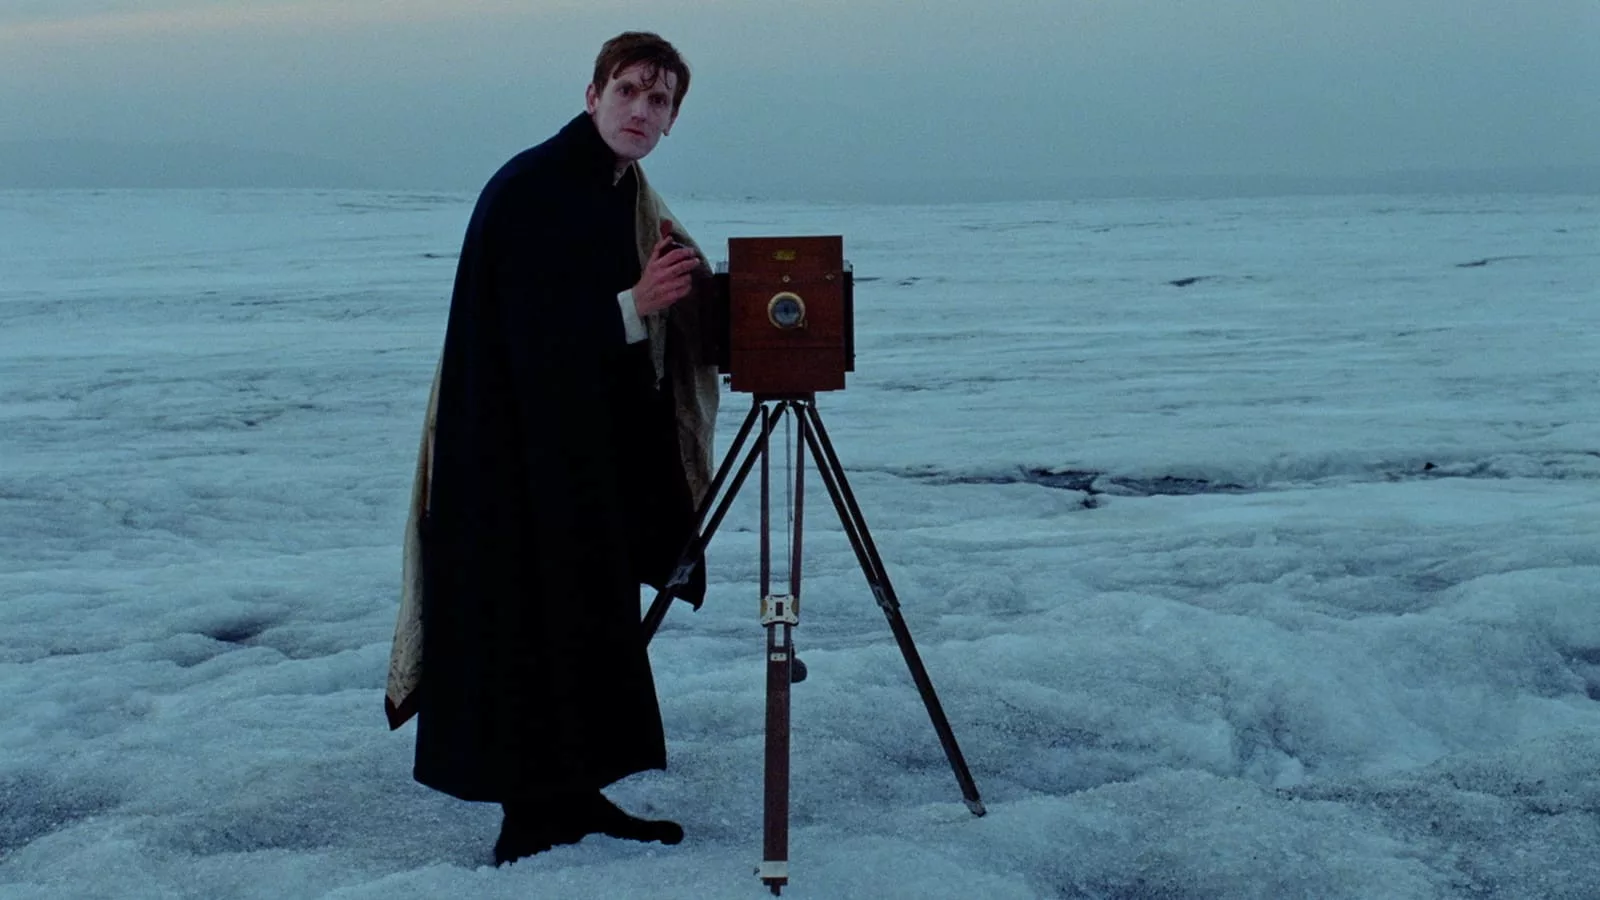 A young man in a cape and boots stands aside an old fashion camera, on a large, desolate ice field